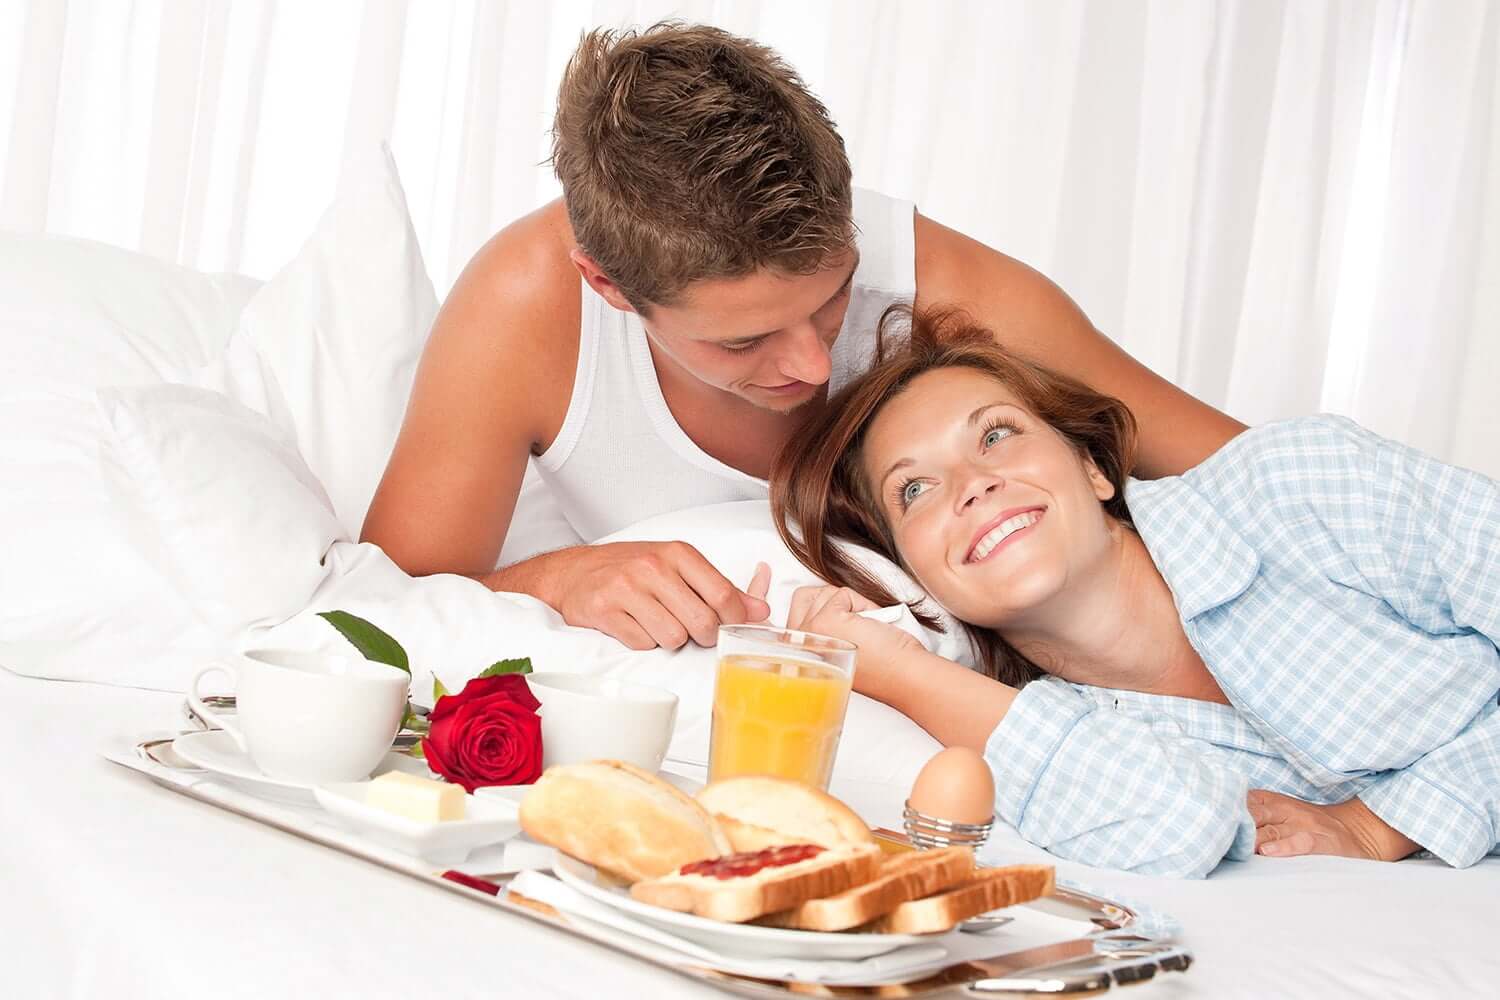 11 Ways To Surprise and Woo Your Wife-to-be Before The Wedding Day